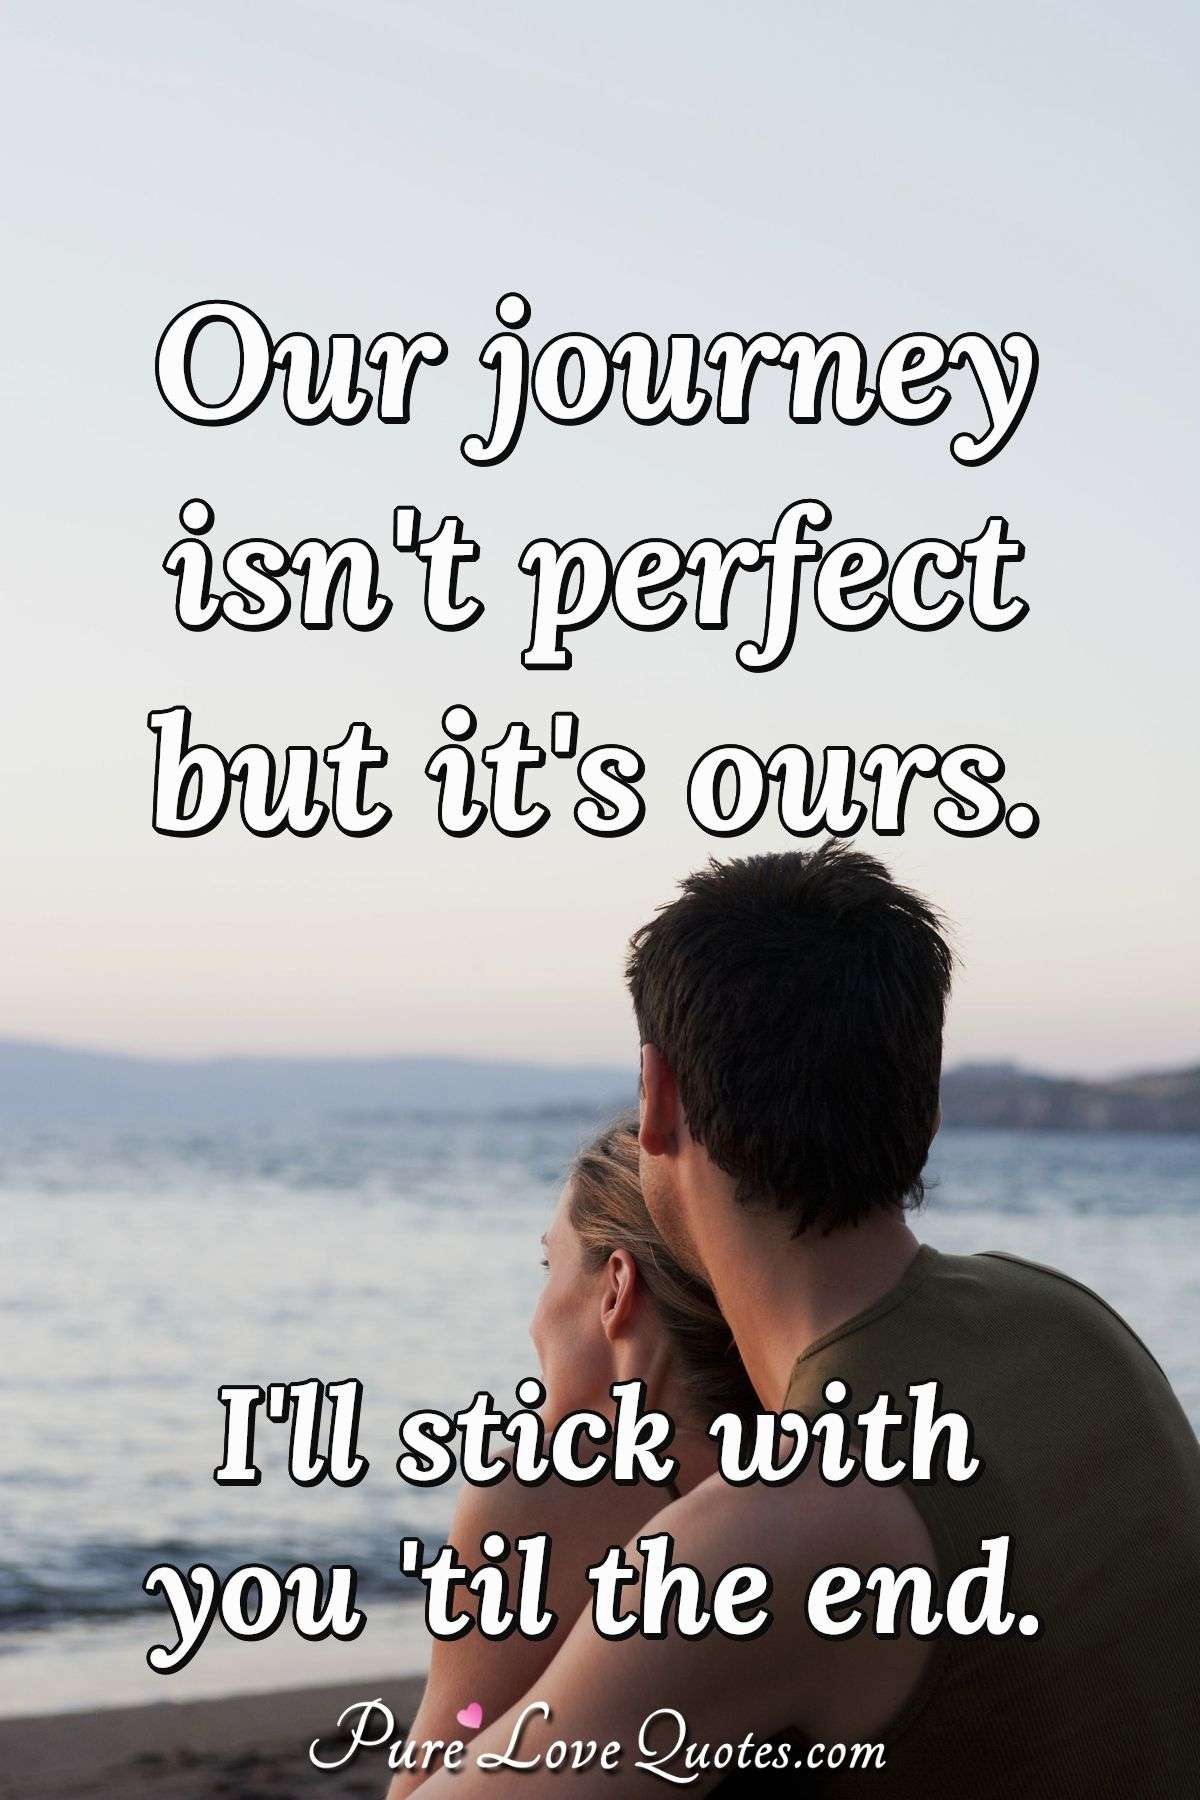 Our journey isn't perfect but it's ours. I'll stick with you 'til the end. - Anonymous